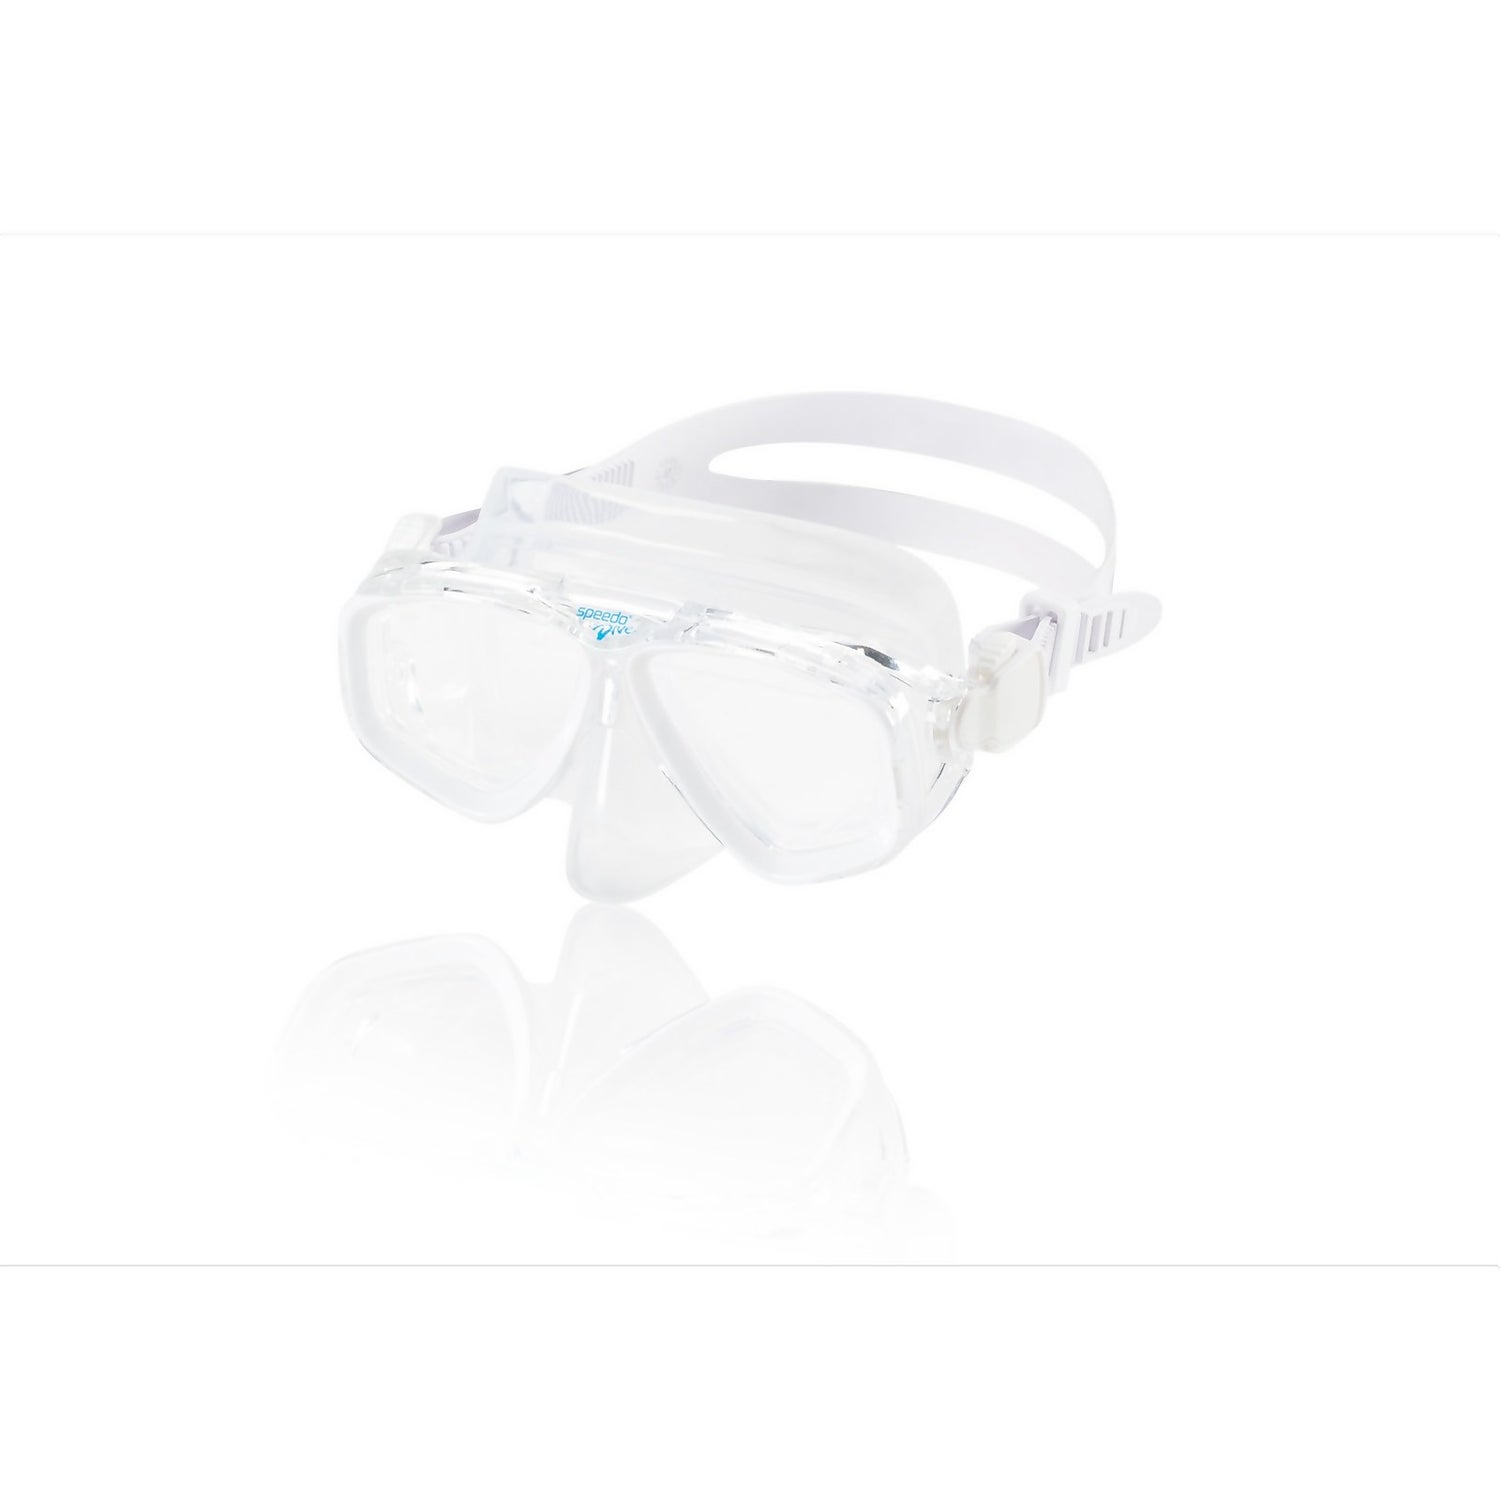 Excite Aviator Mask Youth Adult, Spring/Summer